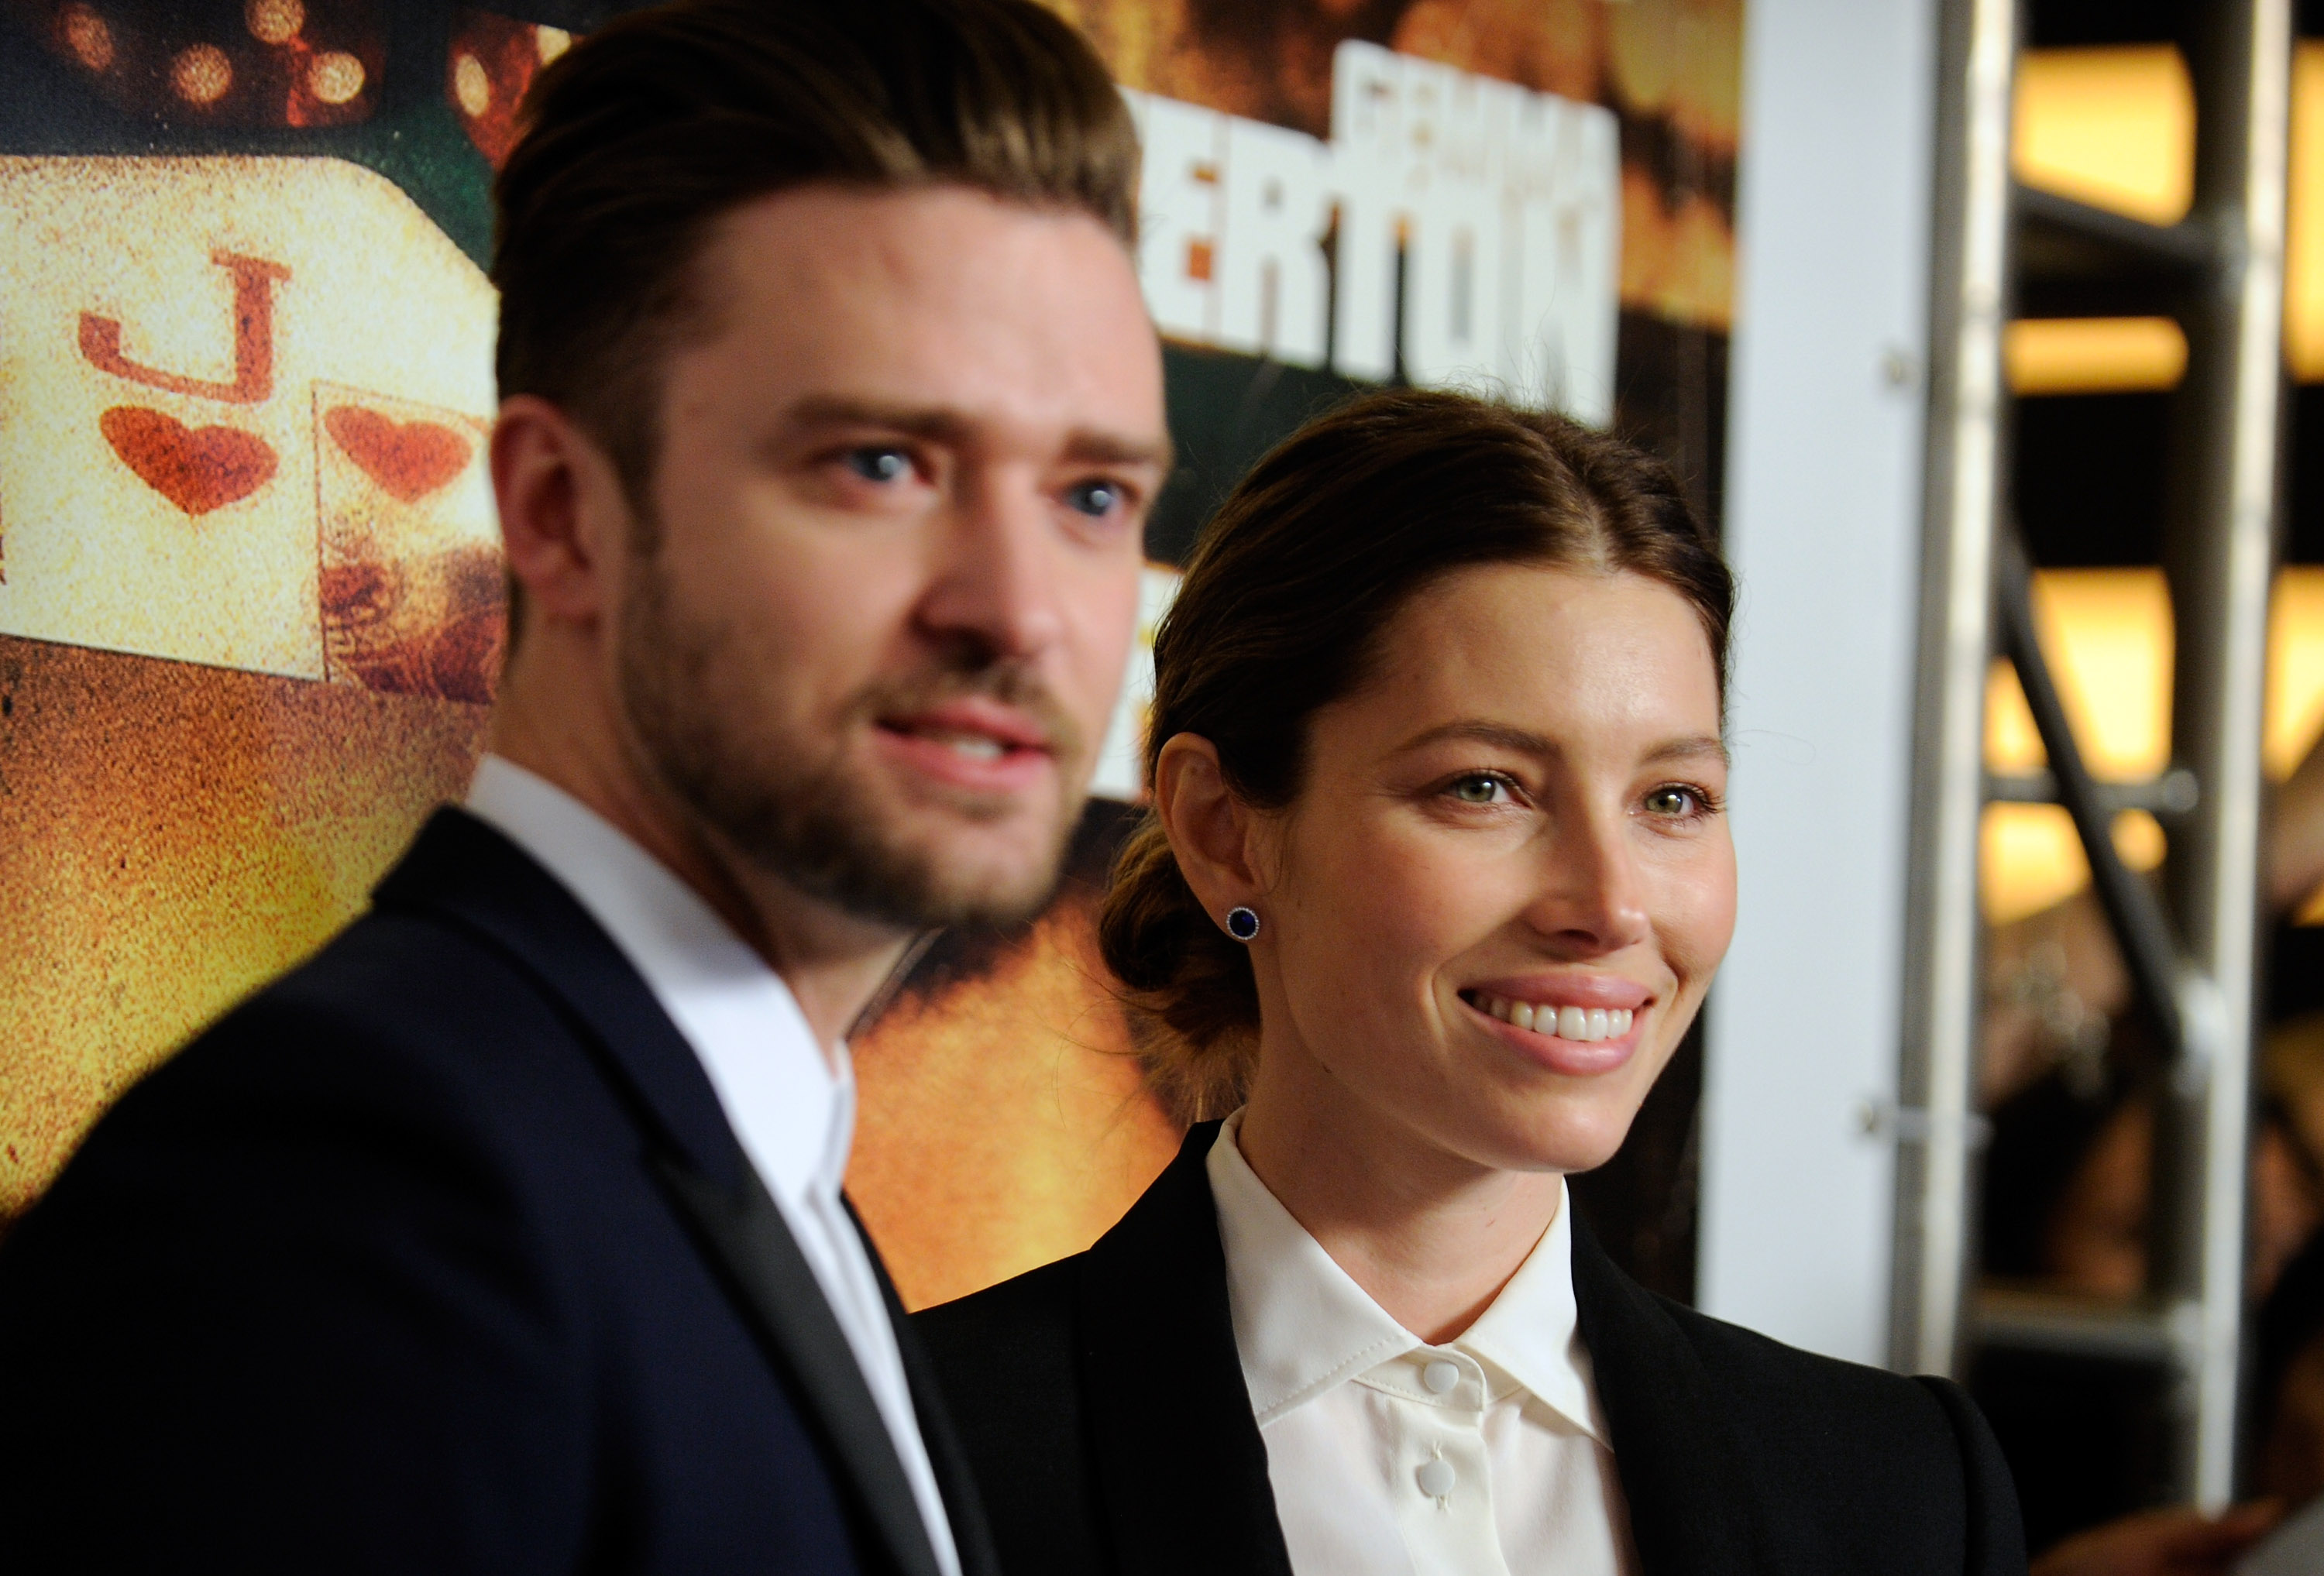 Justin Timberlake and his wife actress Jessica Biel, arrive at the world premiere of Twentieth Century Fox and New Regency's film "Runner Runner" at Planet Hollywood Resort &amp; Casino on Sept. 18, 2013 in Las Vegas. (David Becker—Getty Images)